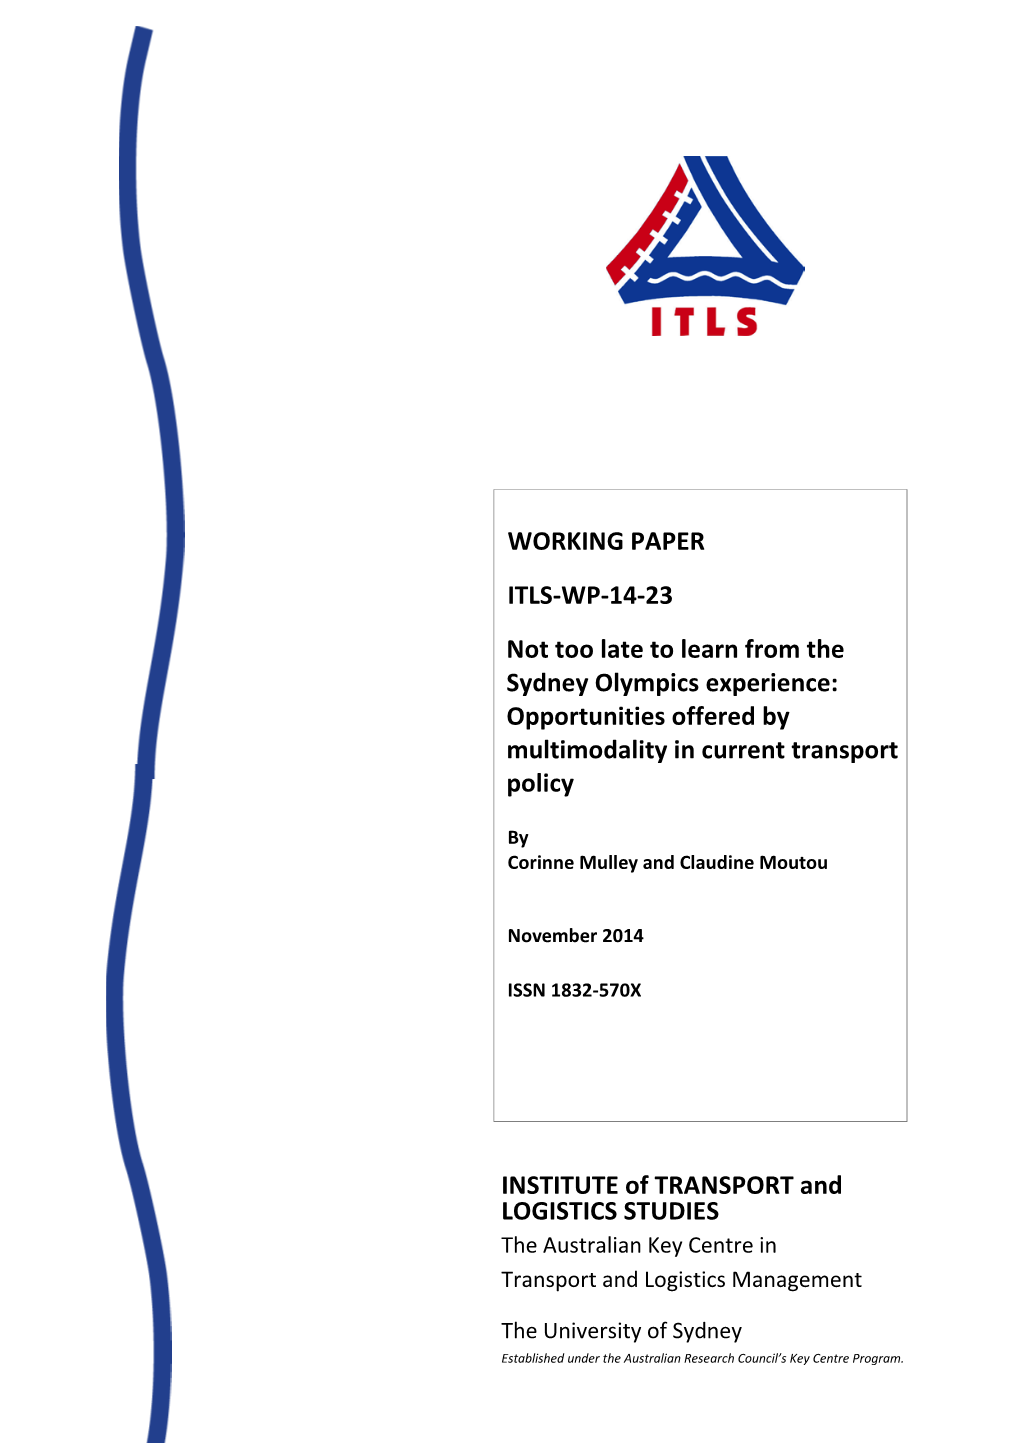 WORKING PAPER ITLS-WP-14-23 Not Too Late to Learn from the Sydney Olympics Experience: Opportunities Offered by Multimodality in Current Transport Policy